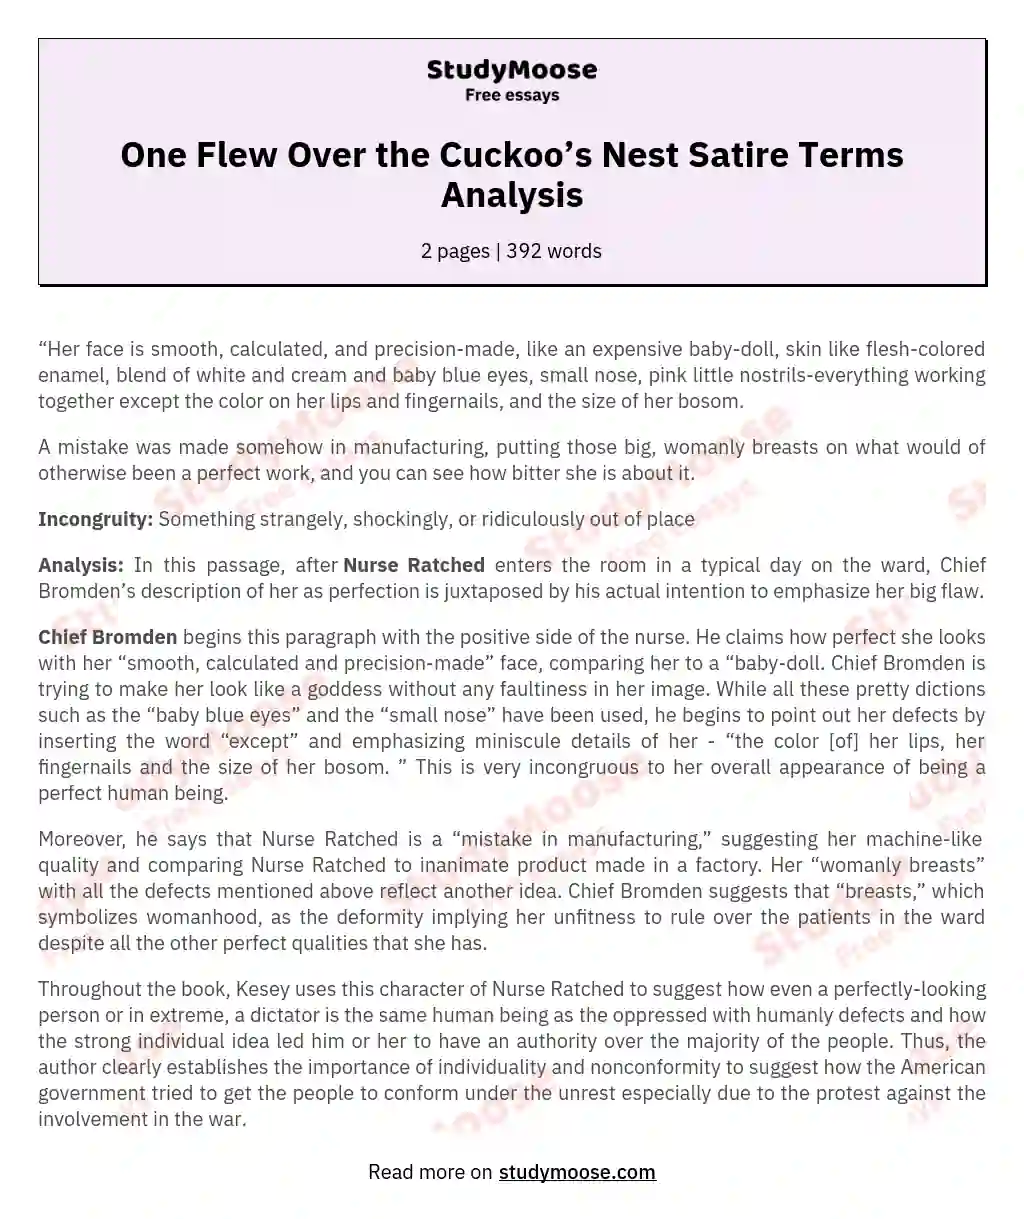 One Flew Over the Cuckoo’s Nest Satire Terms Analysis essay